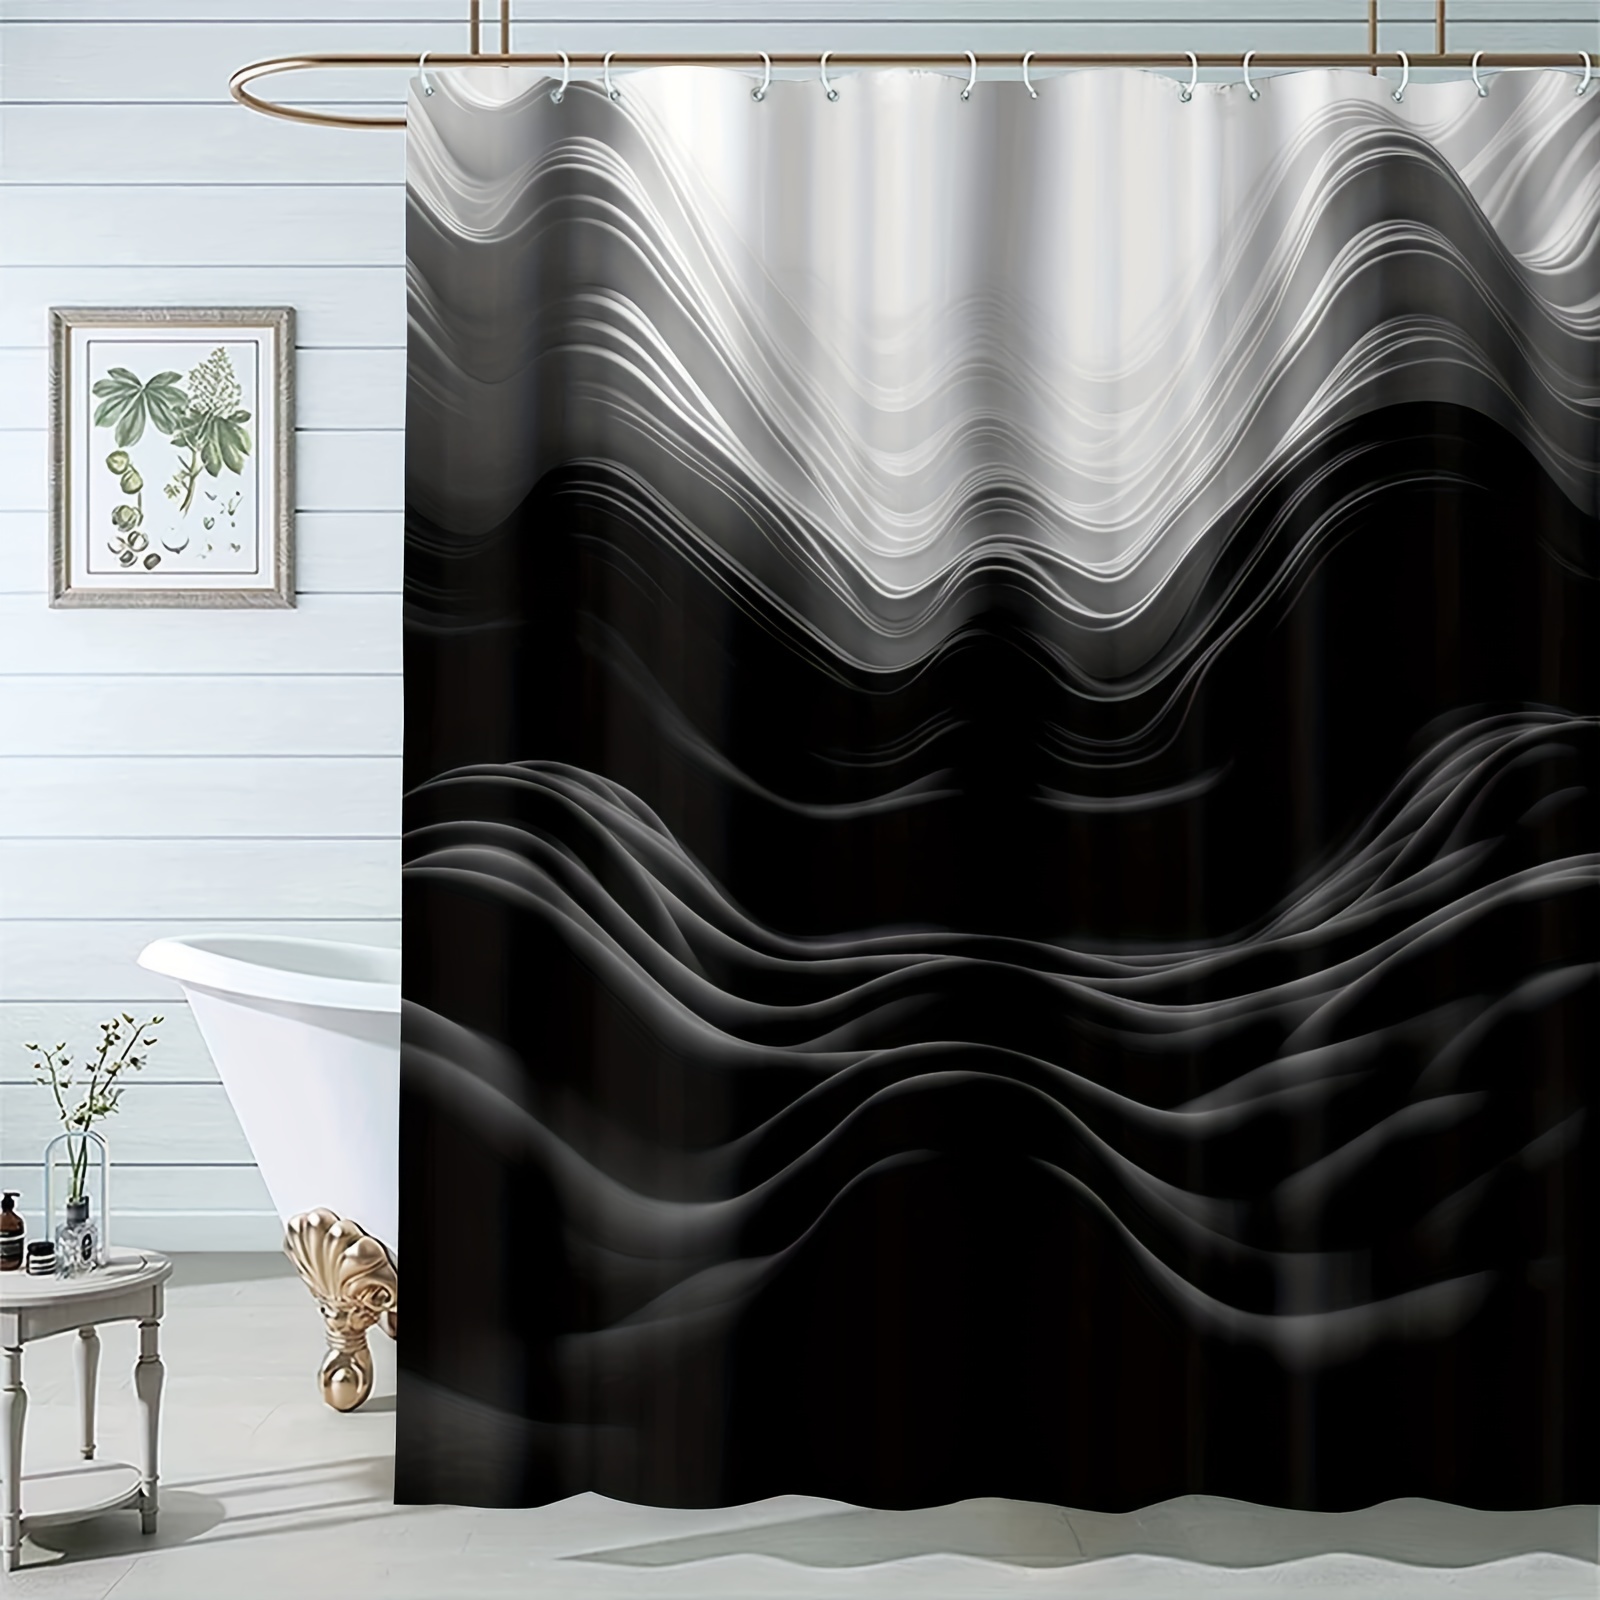 1pc Abstract Theme Shower Curtain, Black And White Ripple Shower Curtain  With 12 Ring Hooks, Waterproof Fabric Shower Curtain, Home Bathroom  Decoratio